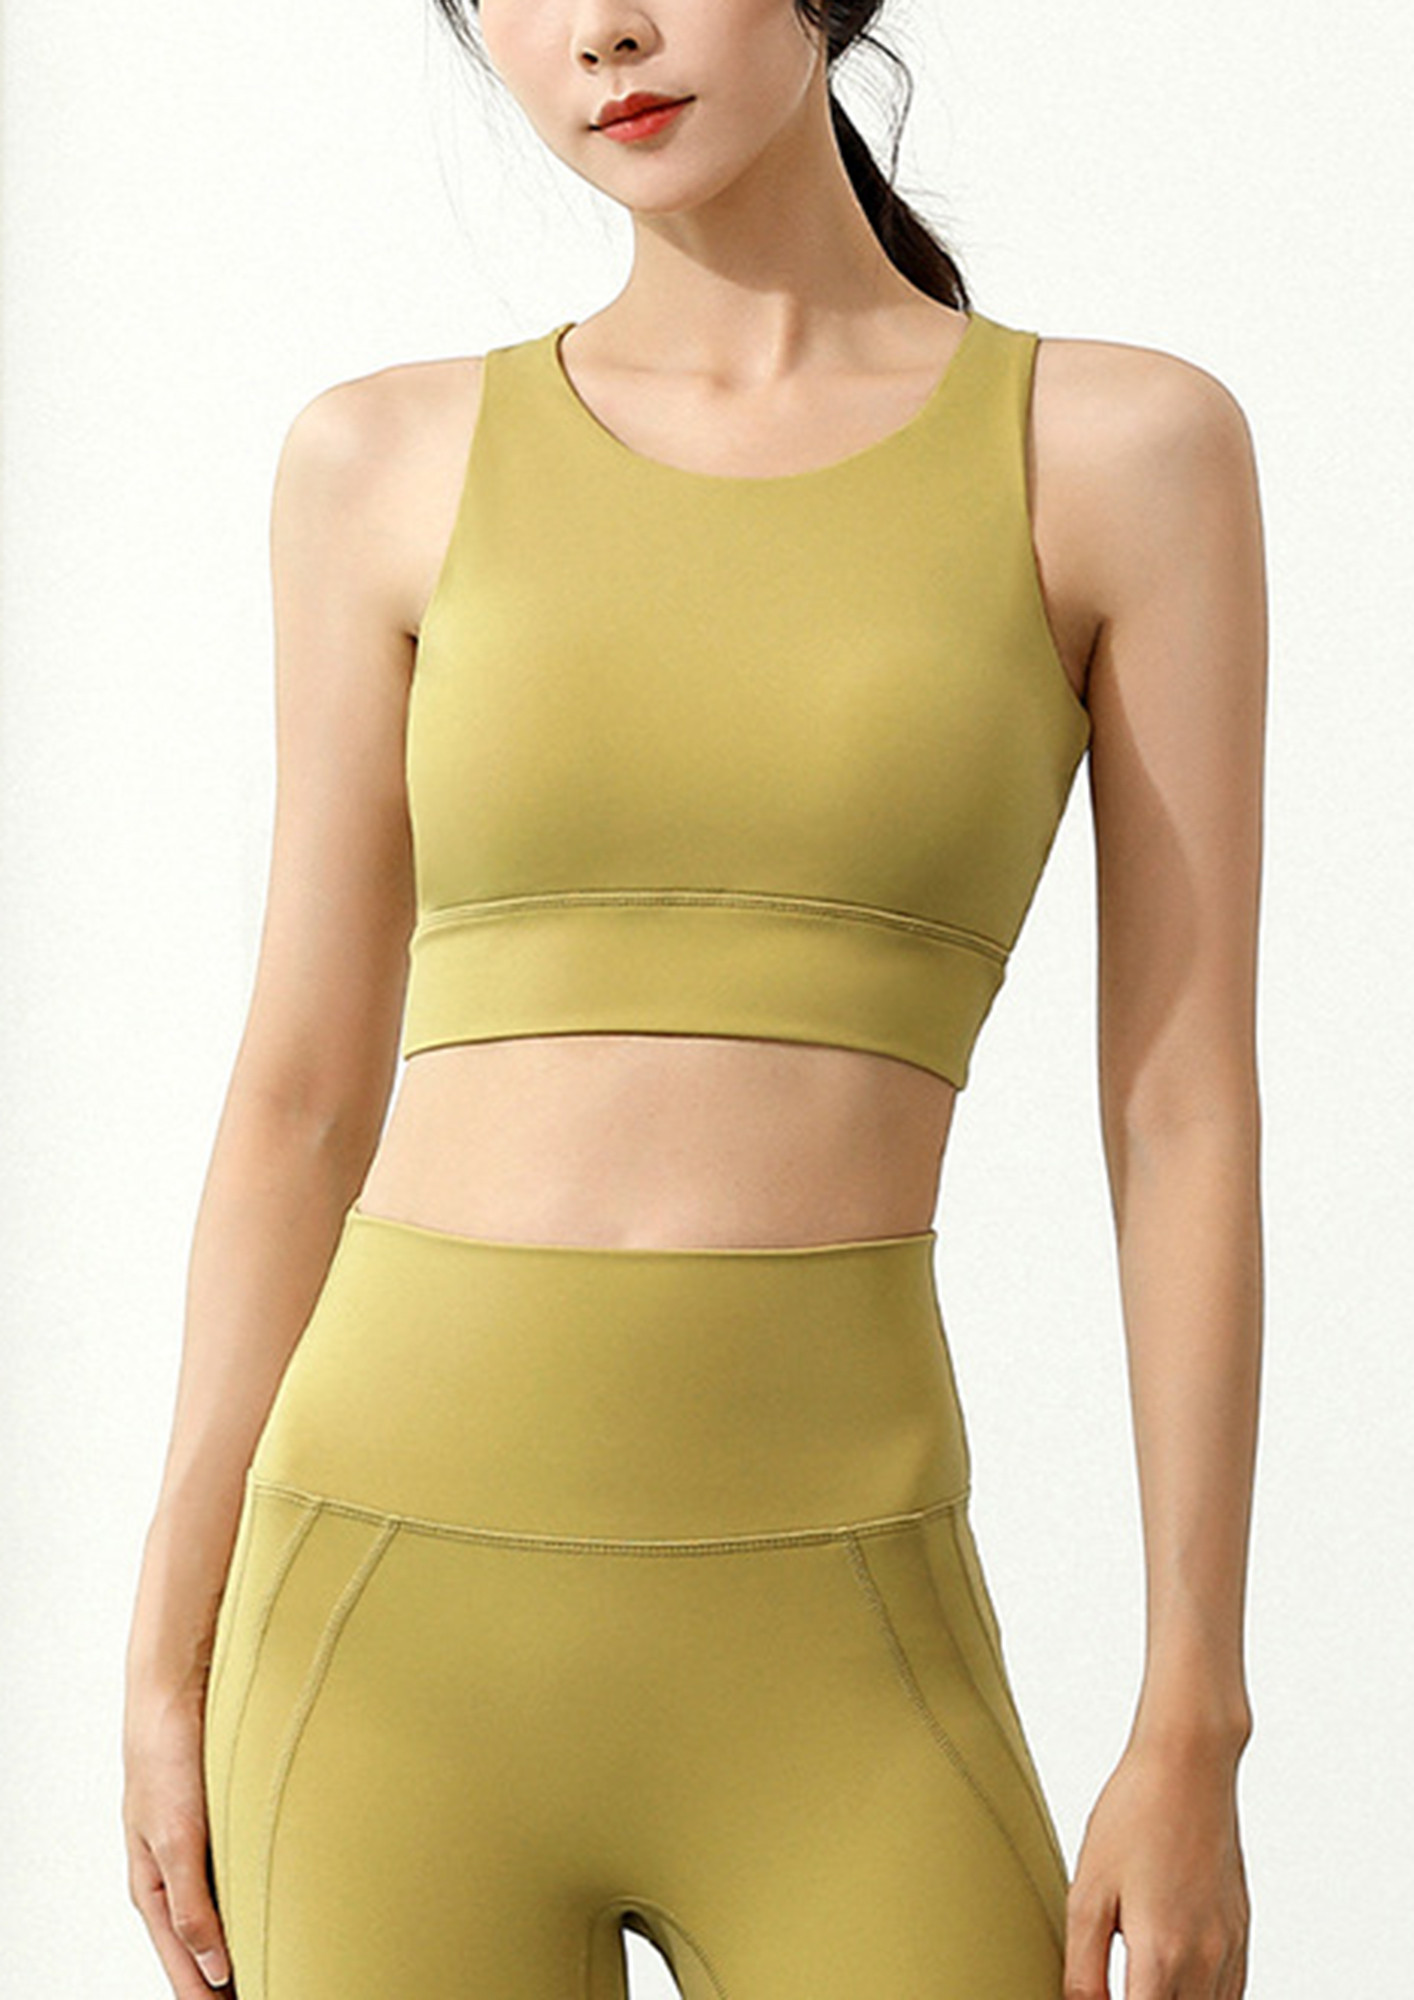 KEEP IT SIMPLE AND CLASSY YELLOW TOP ACTIVEWEAR